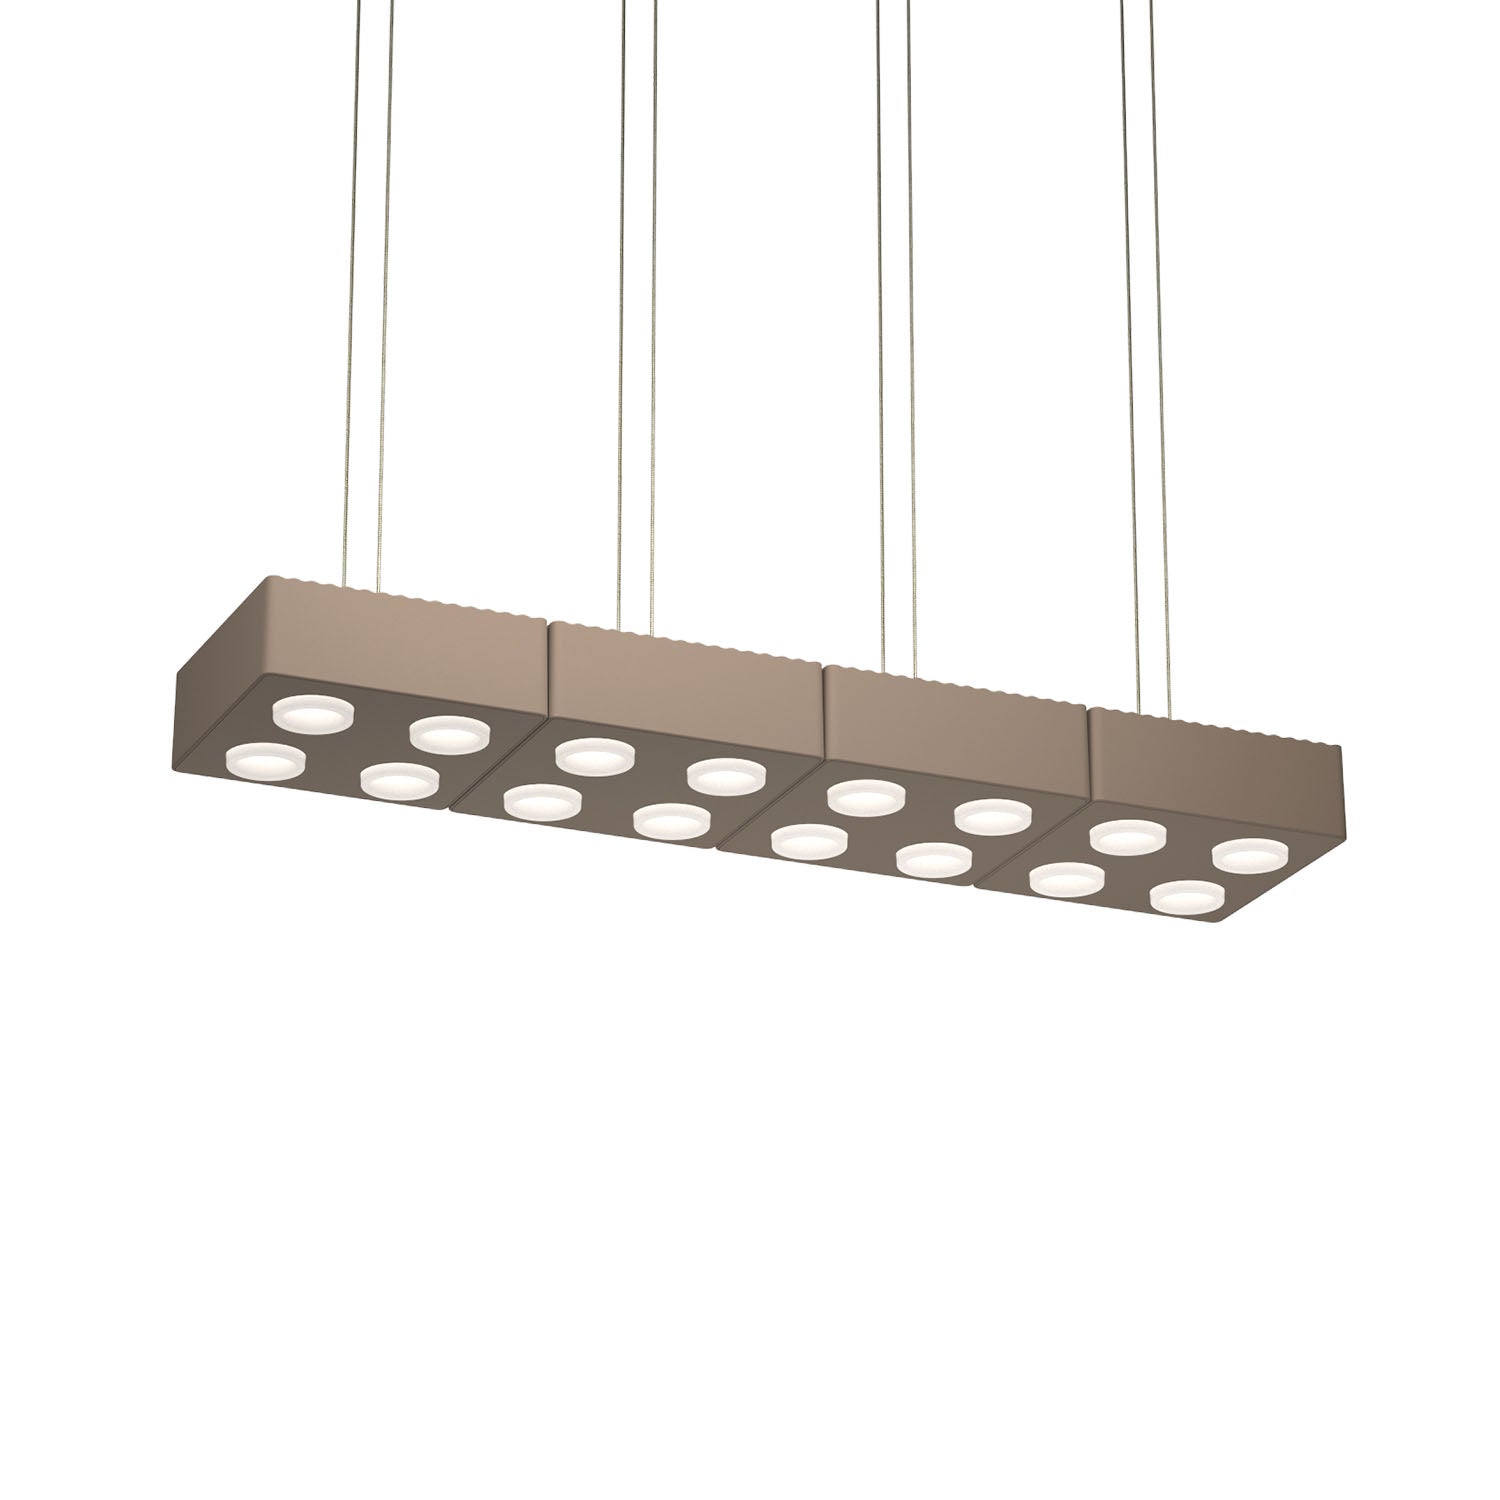 DOMINO - Pendant lamp in the shape of a lego or domino